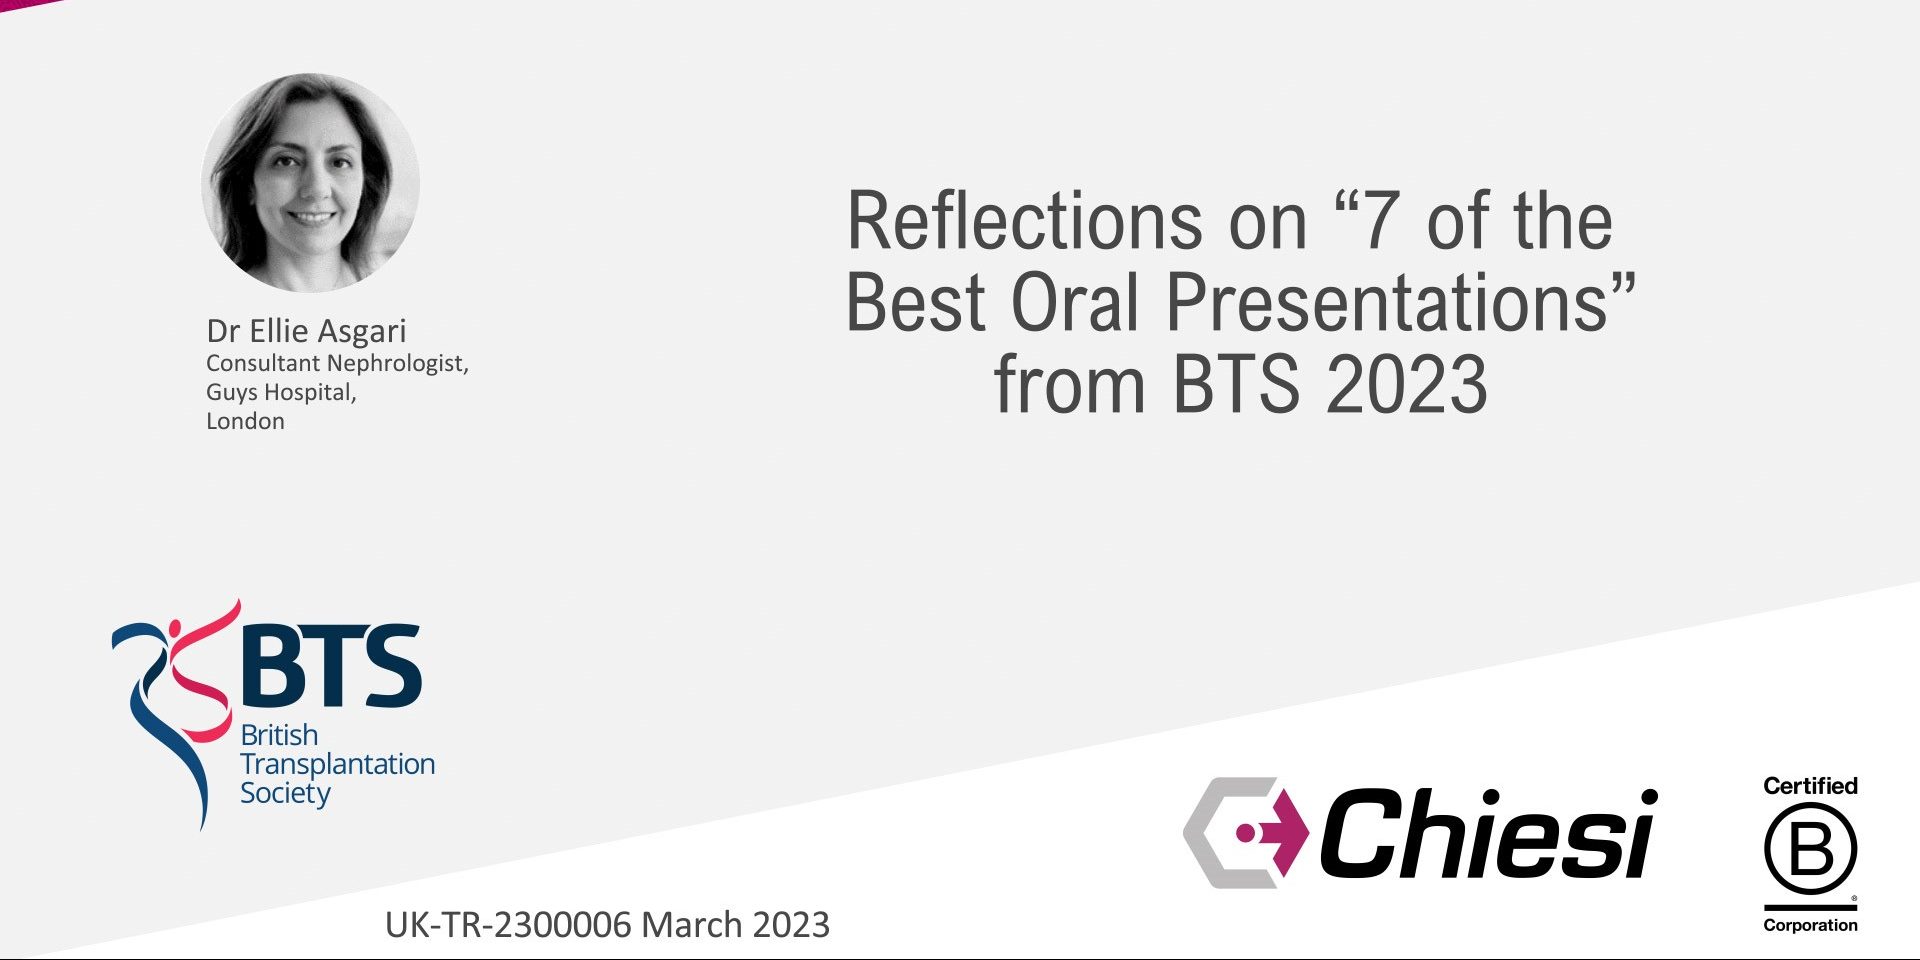 Reflections on “7 of the Best Oral Presentations” from BTS 2023